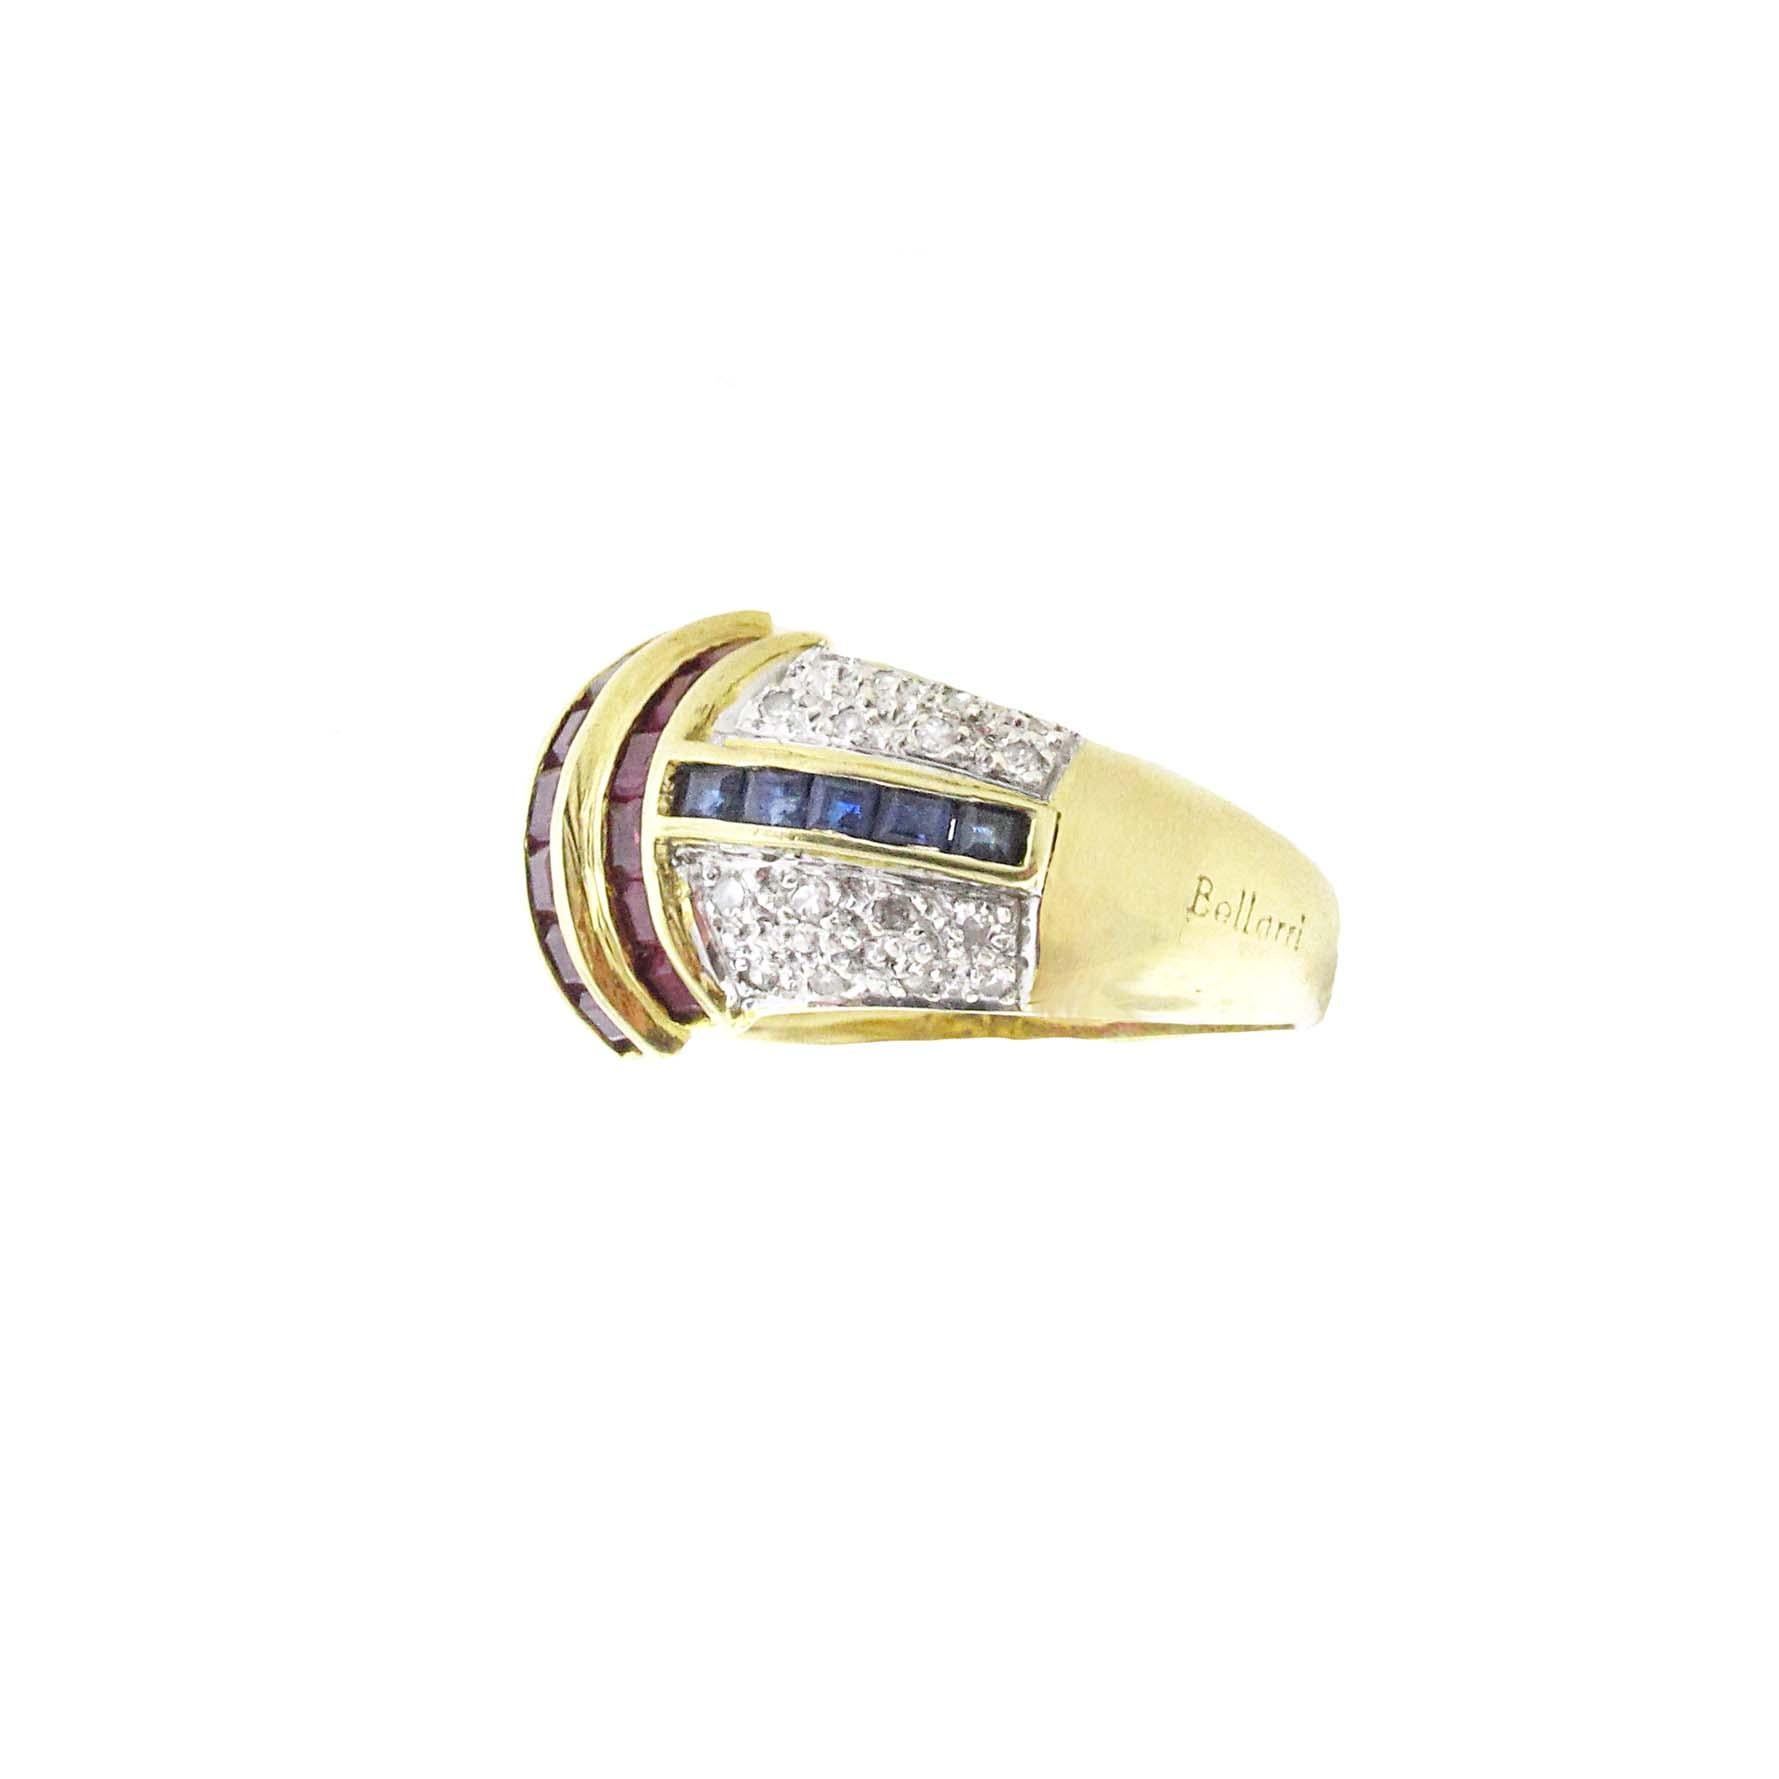 This 18 karat yellow gold Art Deco, Dome ring is in excellent condition. There are round brilliant diamonds set on each side, rubies, sapphires and emeralds that are channel set. When stones are channel set its adds an additional way to hold the